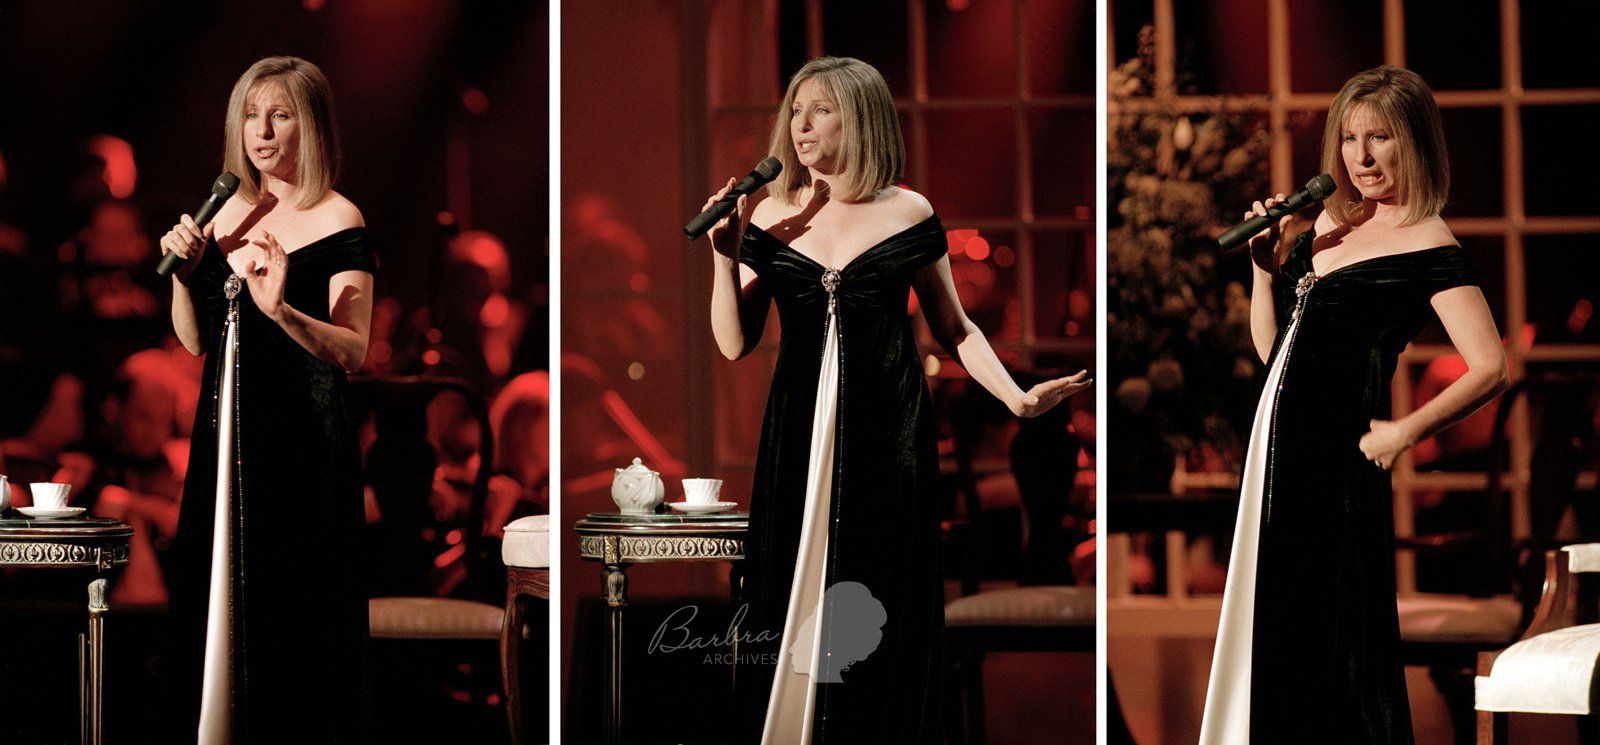 Streisand performs for London audiences at Wembley Arena